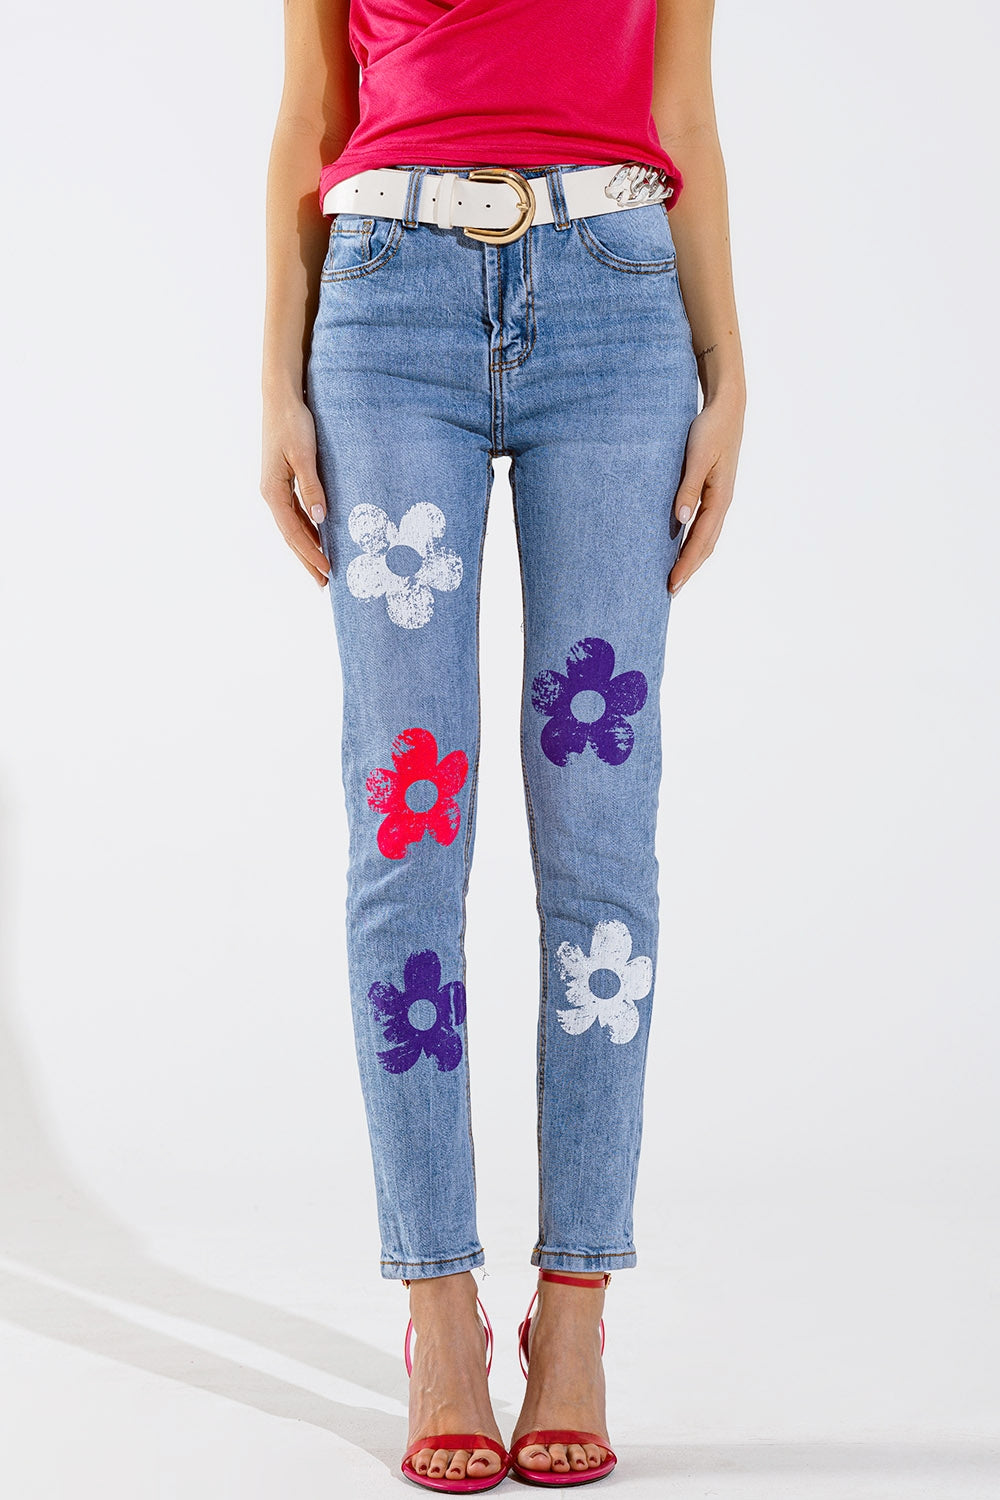 Q2 5 Pocket Jeans skinny With Flower Detail